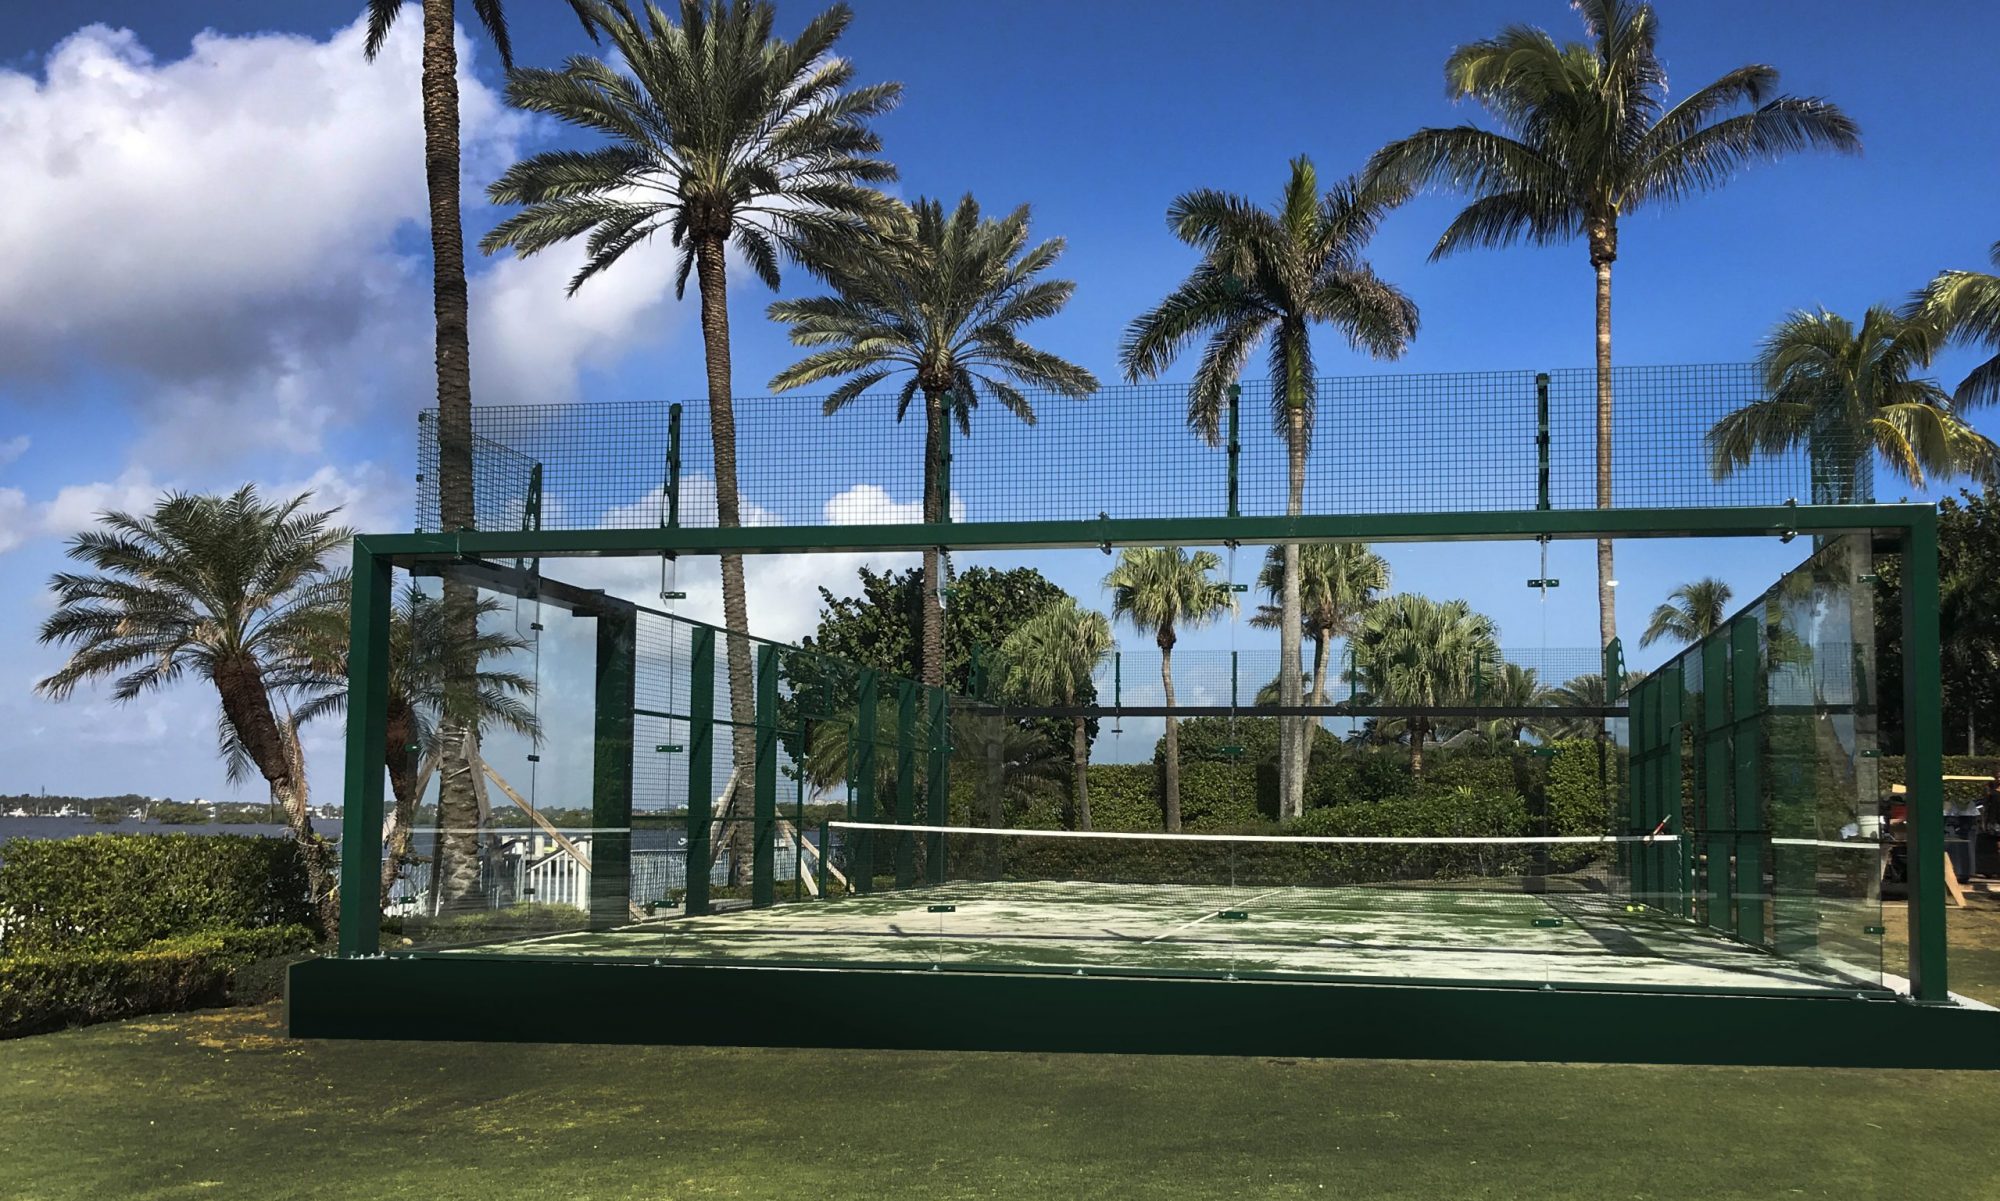 Padel in the USA